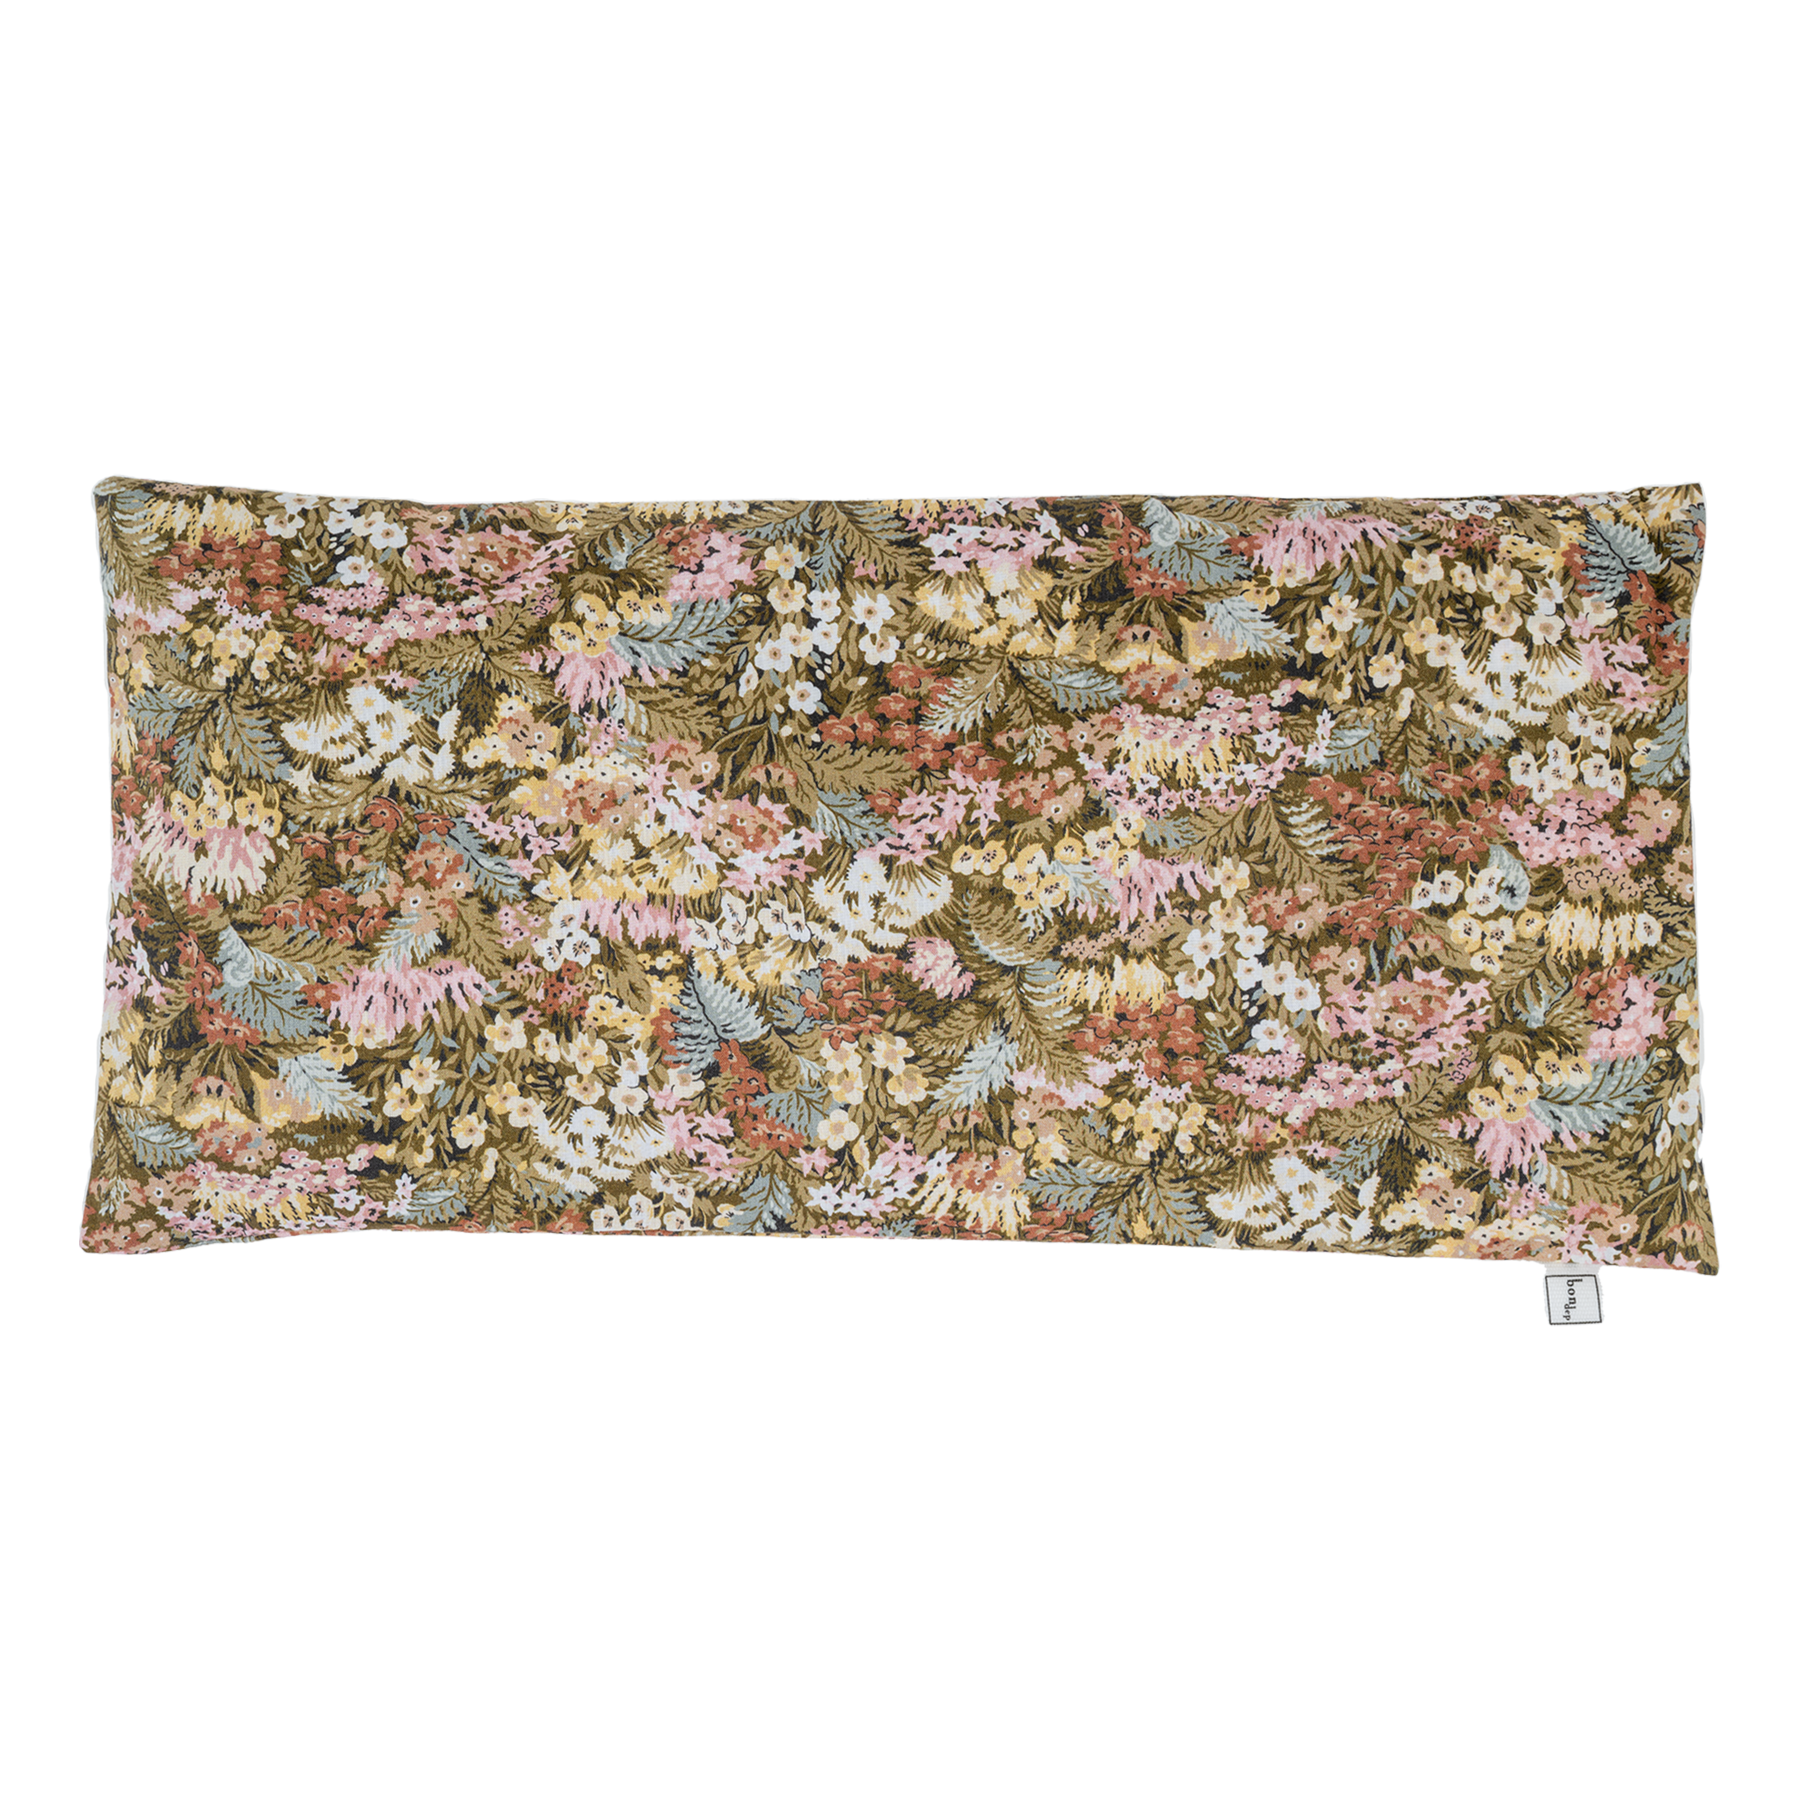 Image of Relaxing Eyepillow mw Liberty Connie Evelyn from Bon Dep Essentials